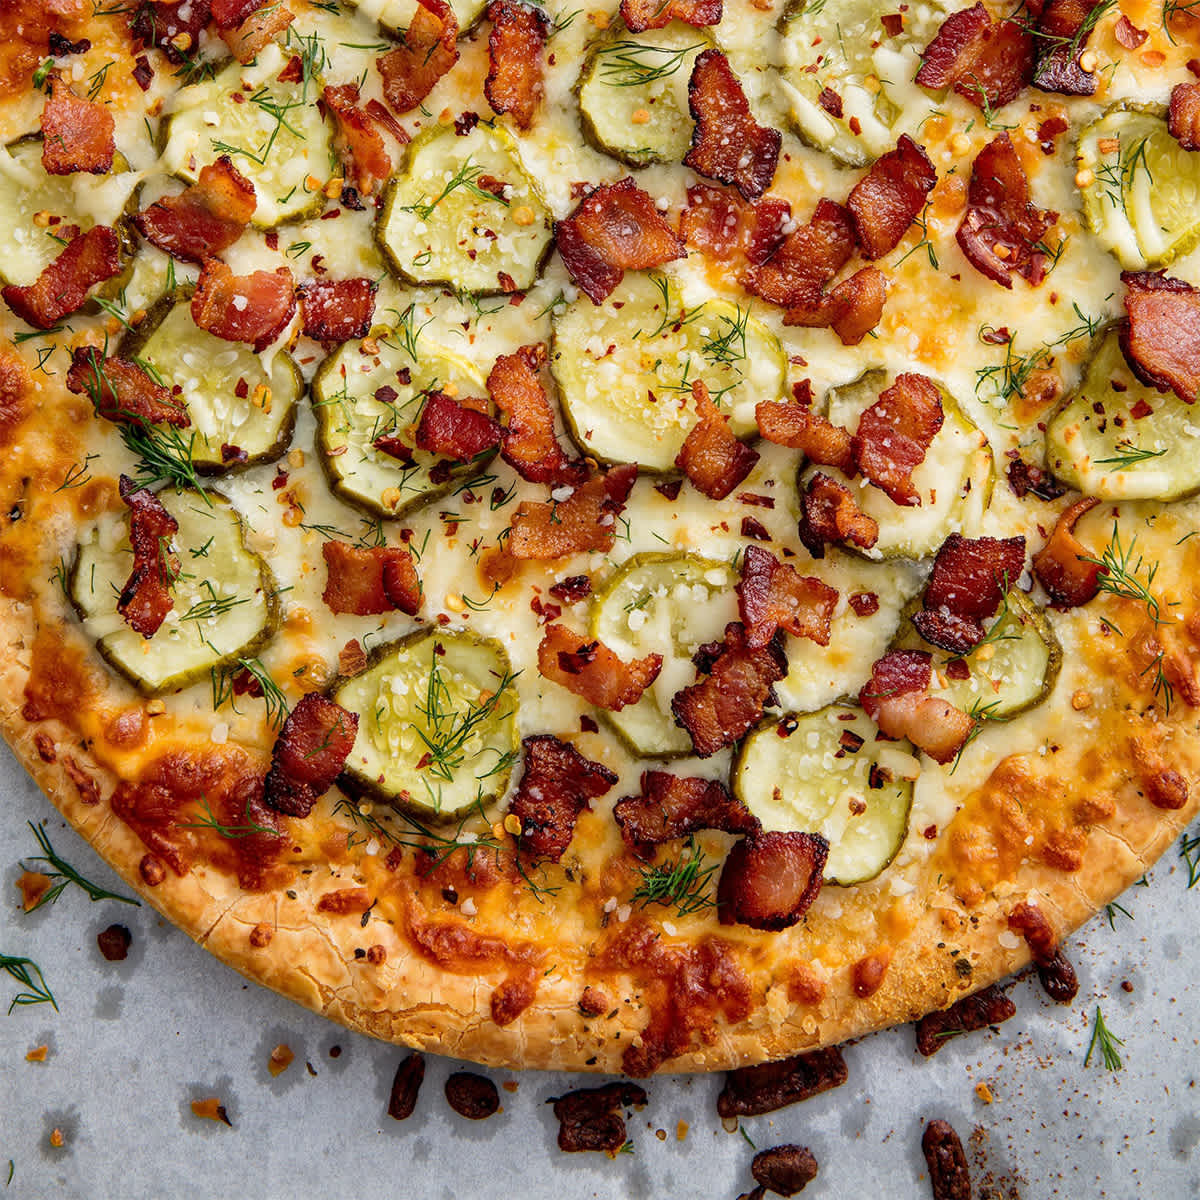 Food Trends: Pizza Toppings on the Rise